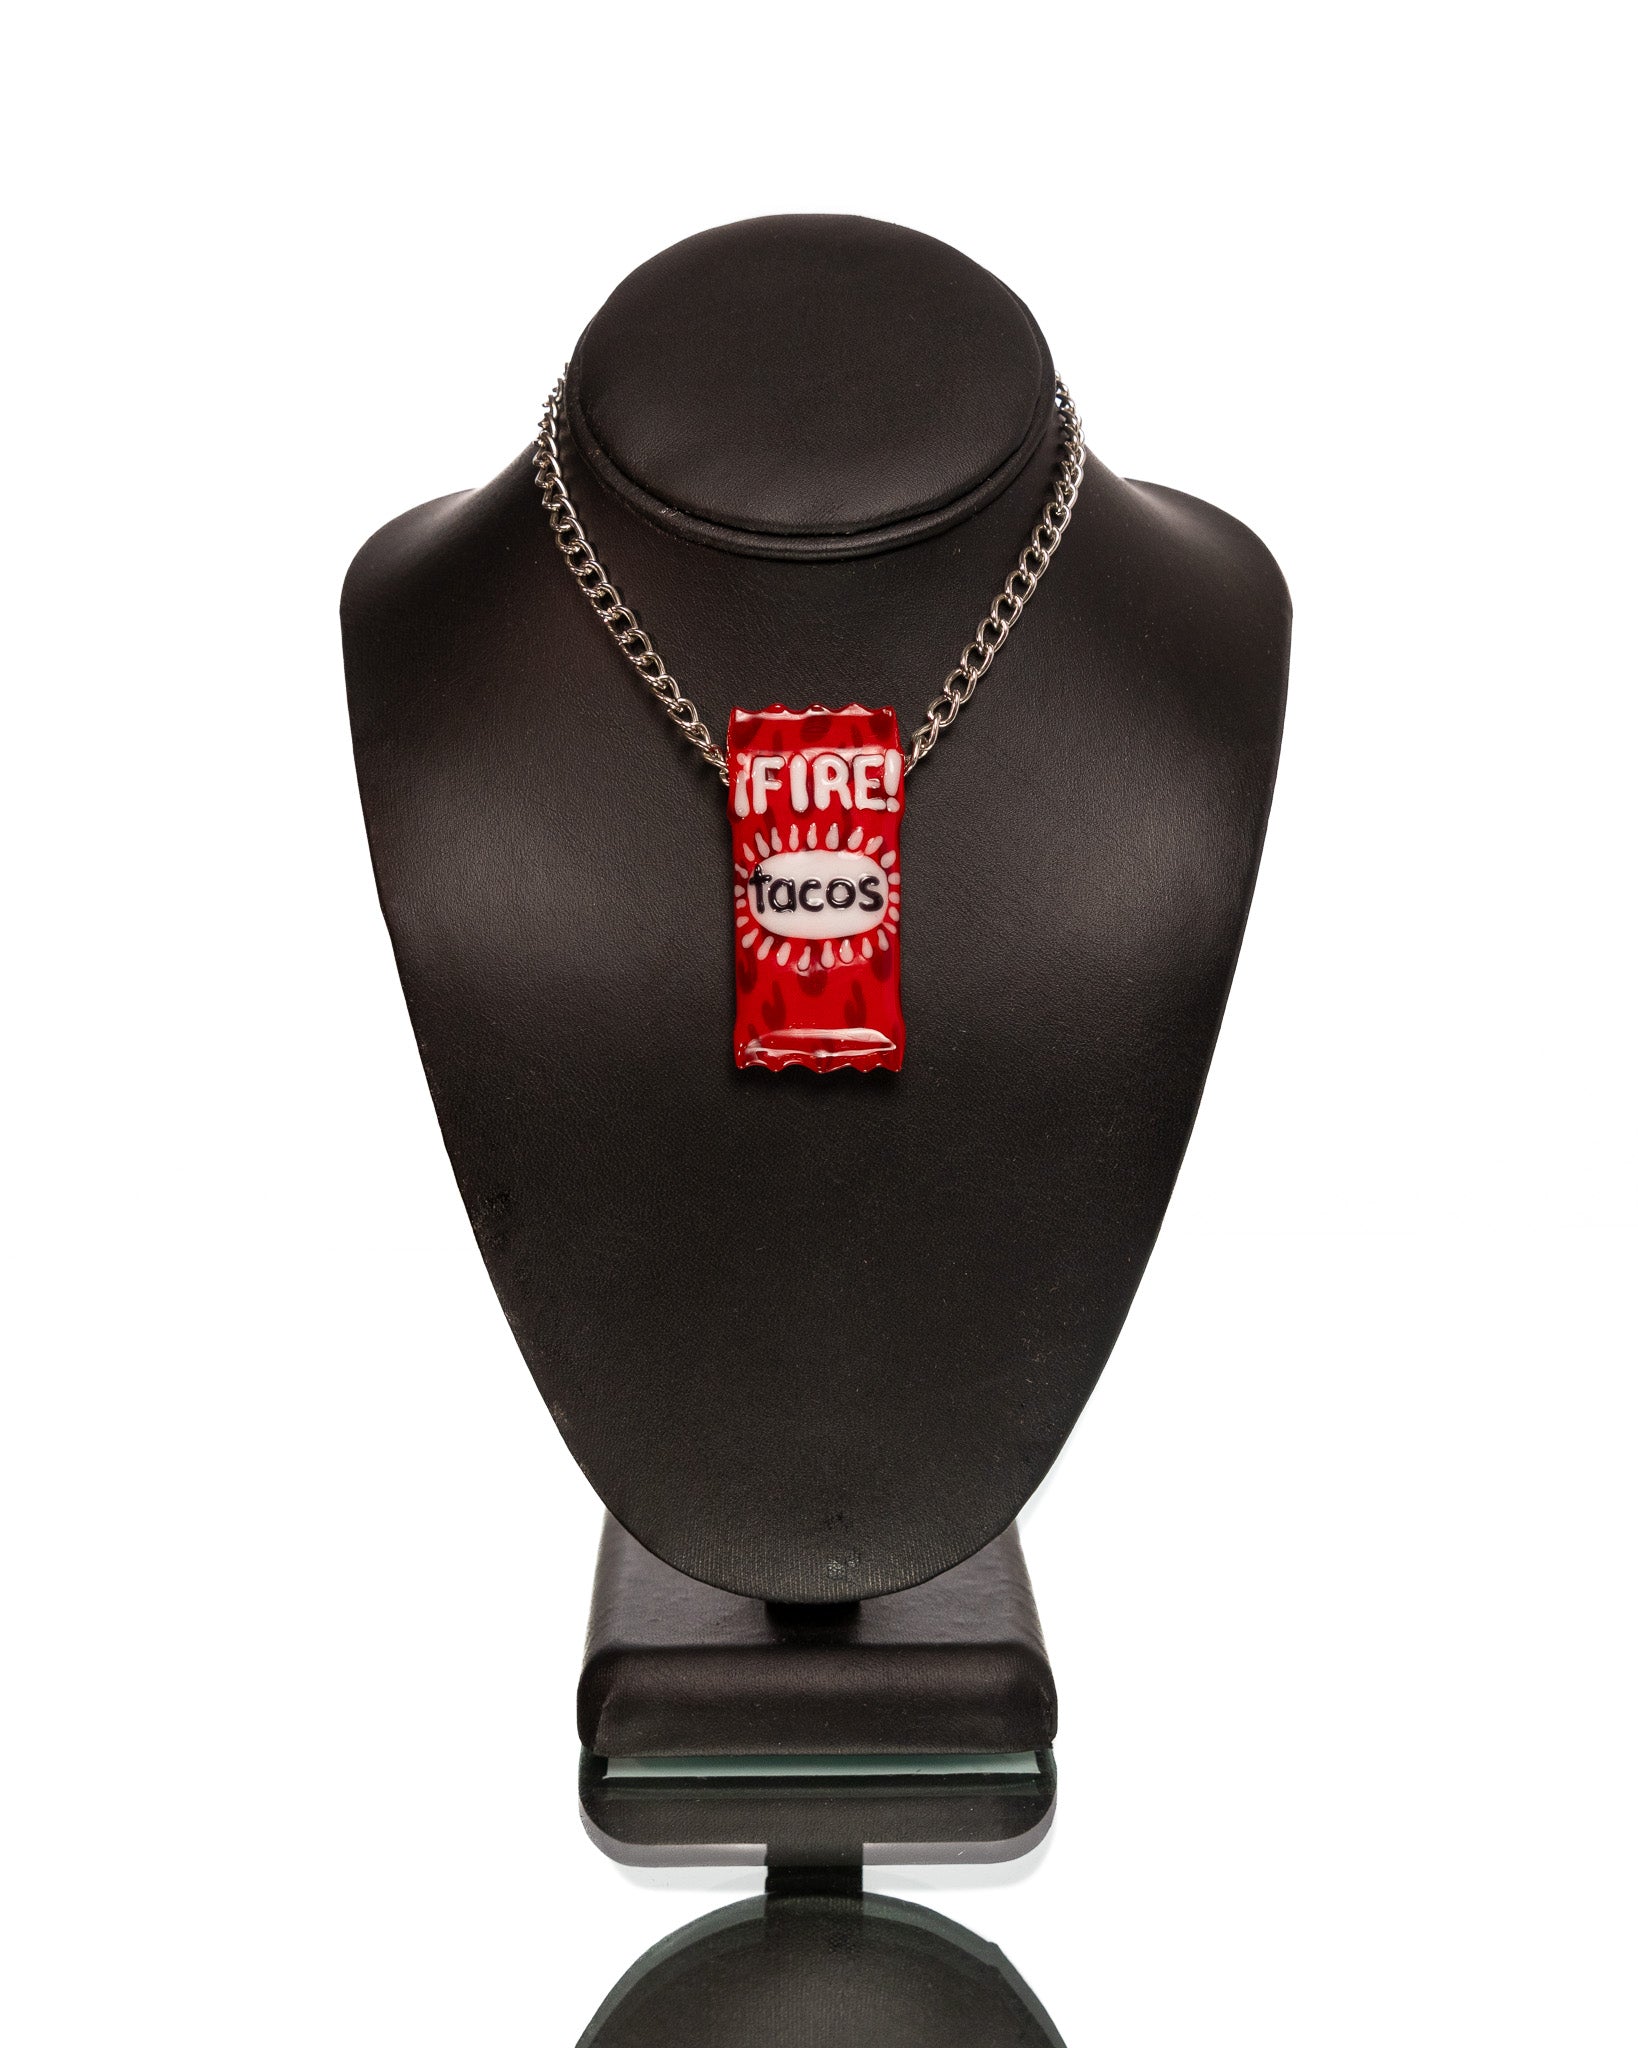 Heretic Glass - Fire Sauce Packet Pendant